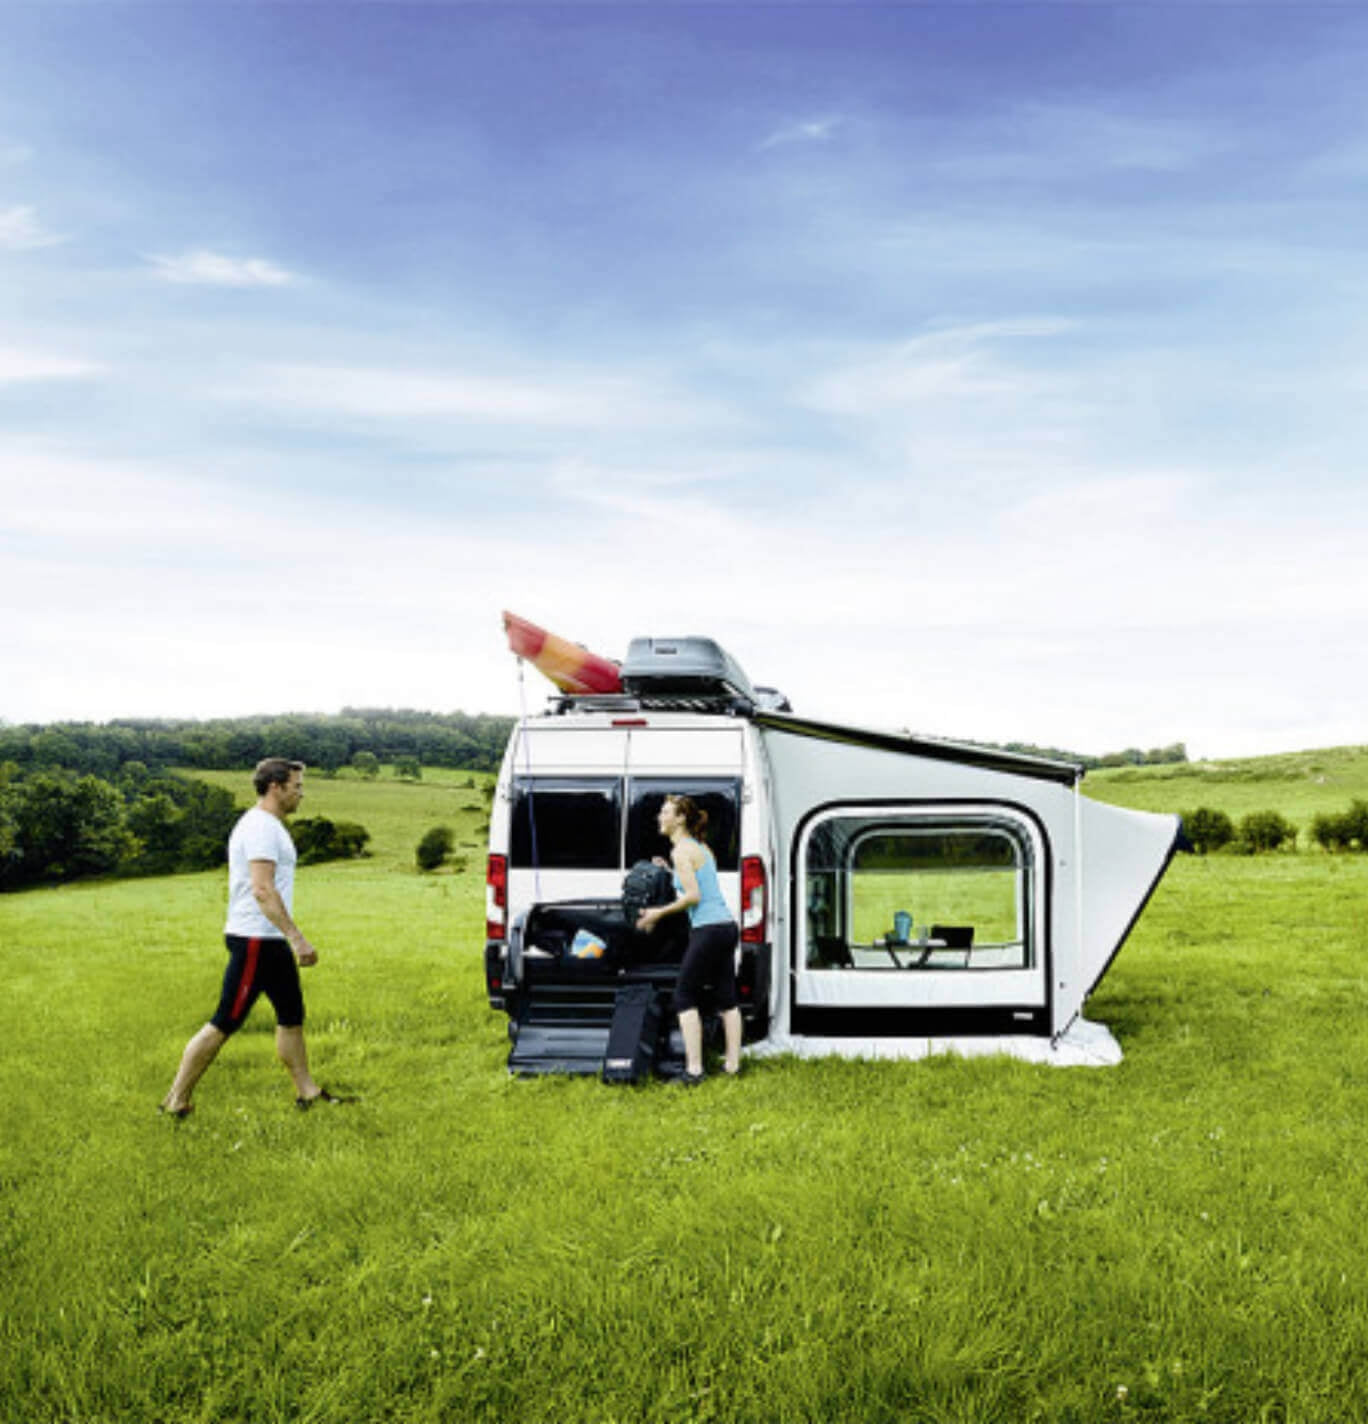 Omnistor 6300 pitched in the park with privacy room